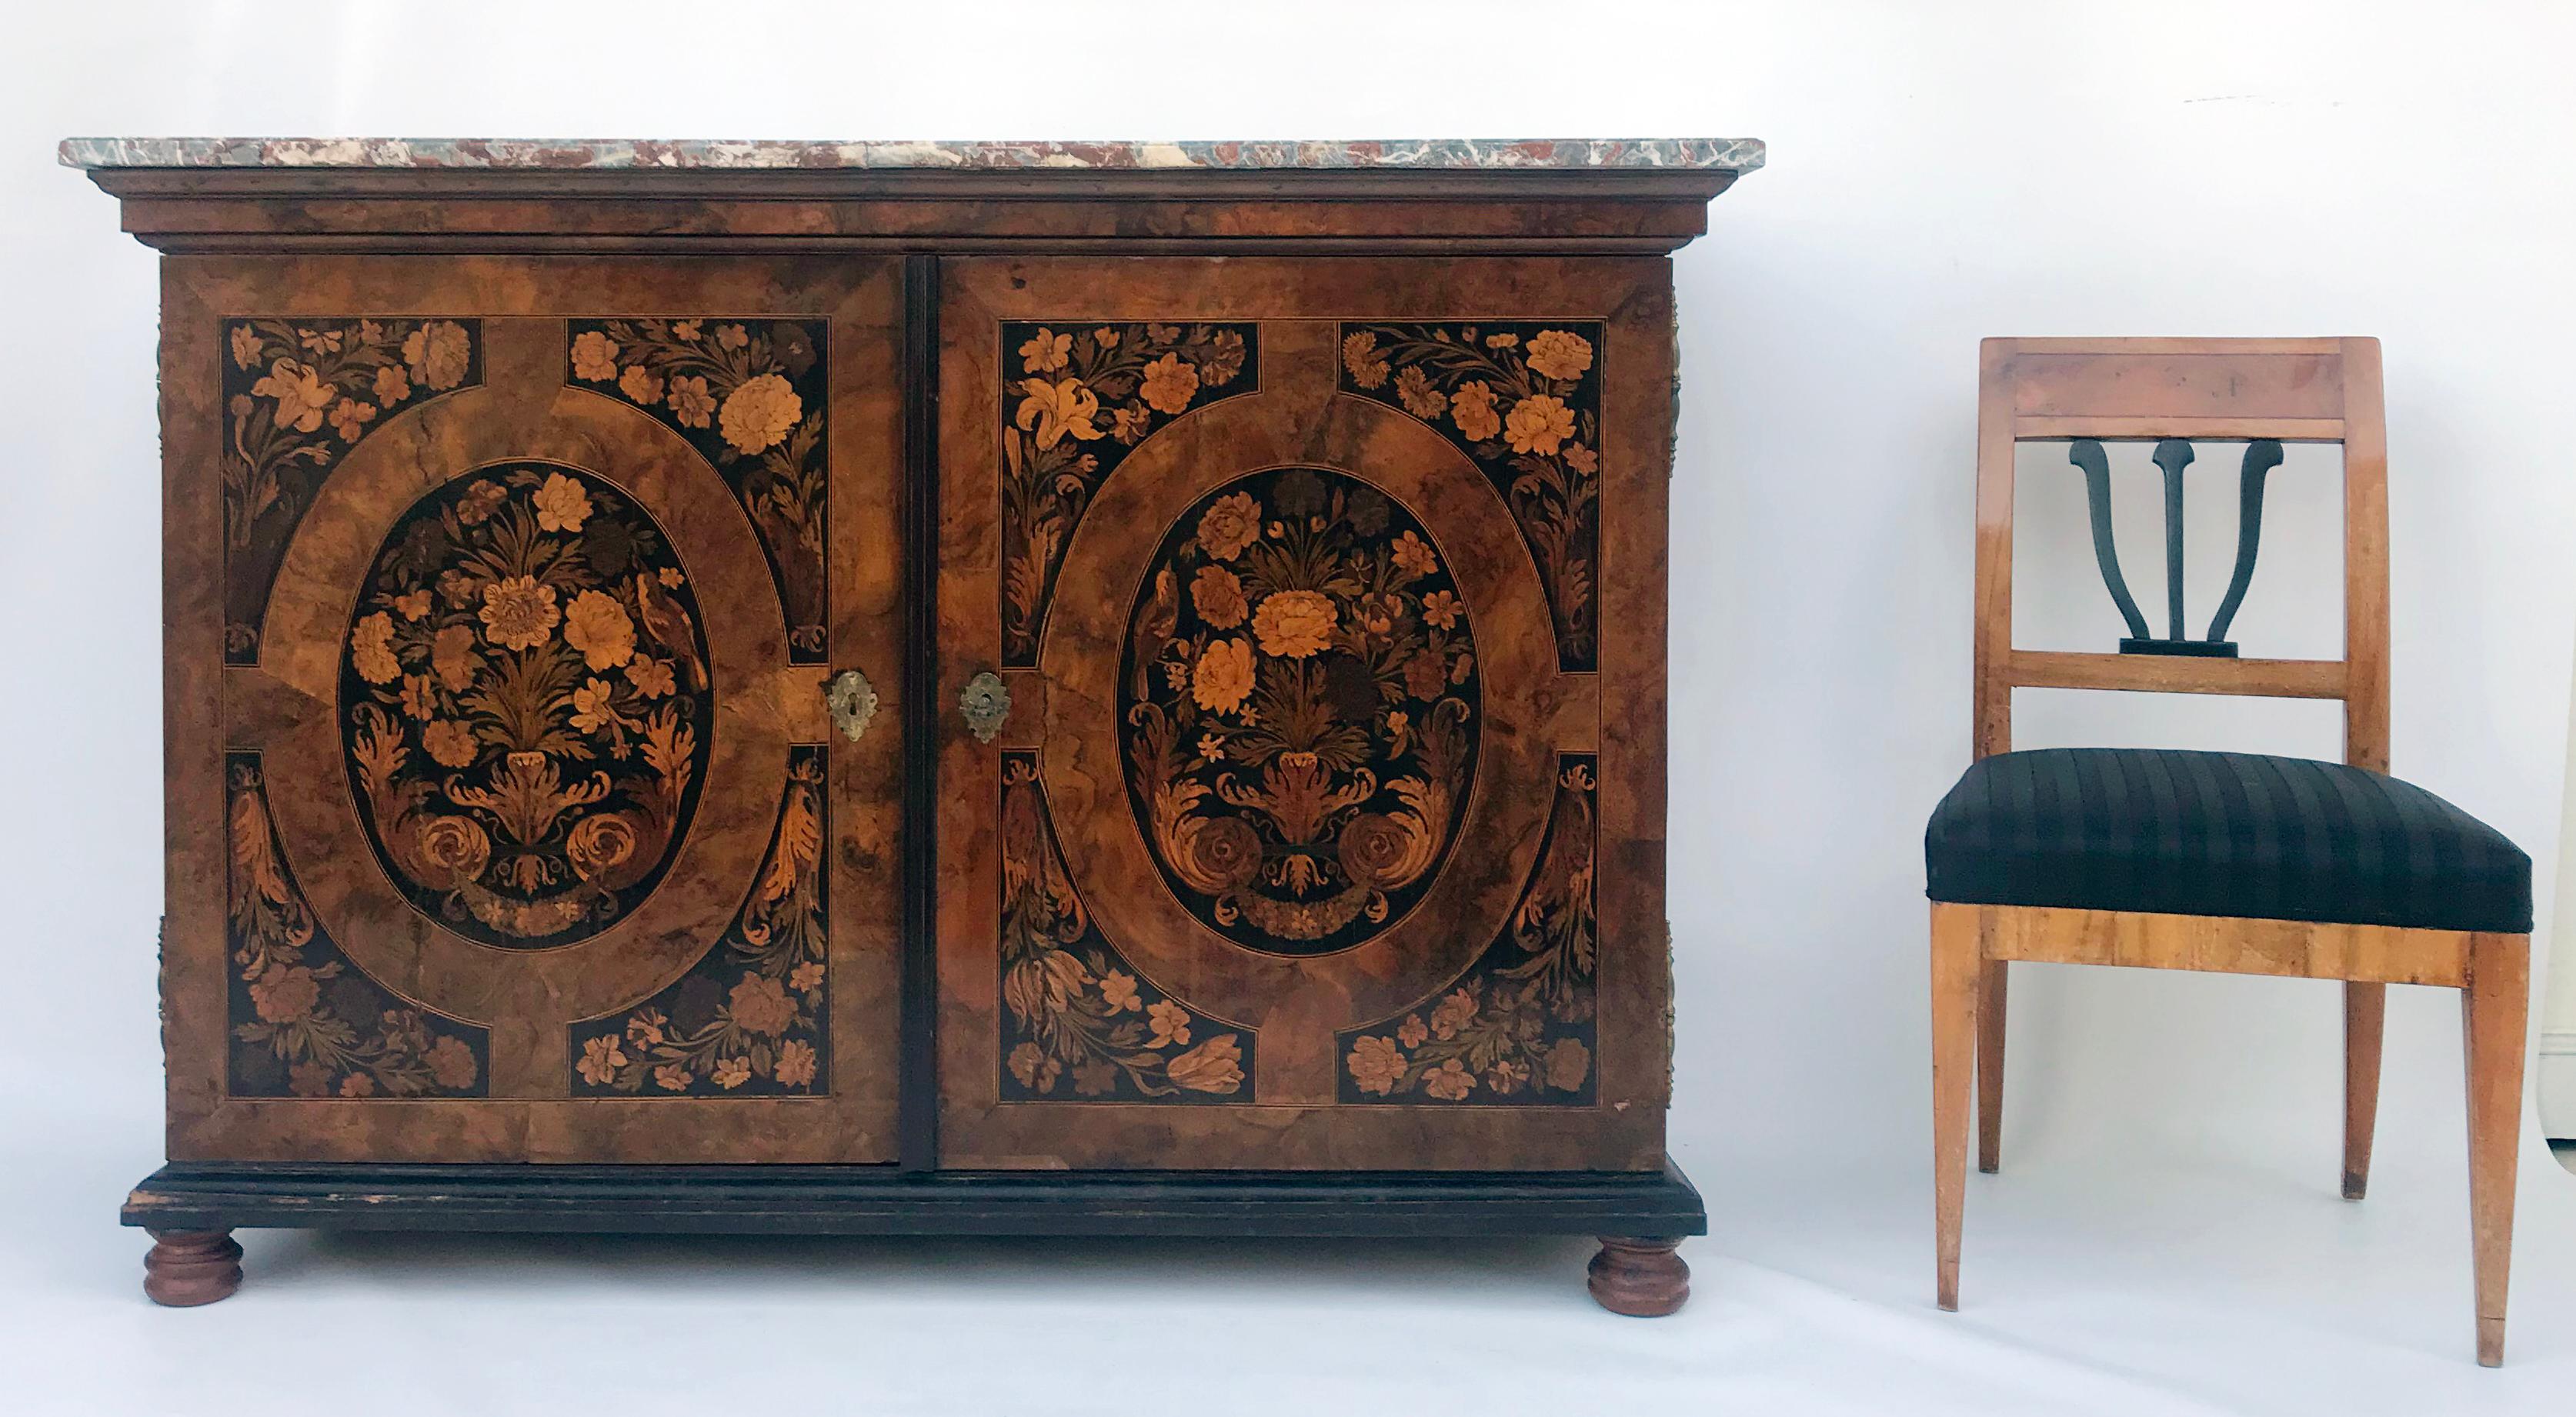 Attributed to Thomas Hache - Baroque sideboard, Grenoble, France, 1740s. Made of walnut and other fine woods. 

Pressed and profiled ball feet, above them a likewise profiled, ebonised strip. Double-door front with large doors extending over the